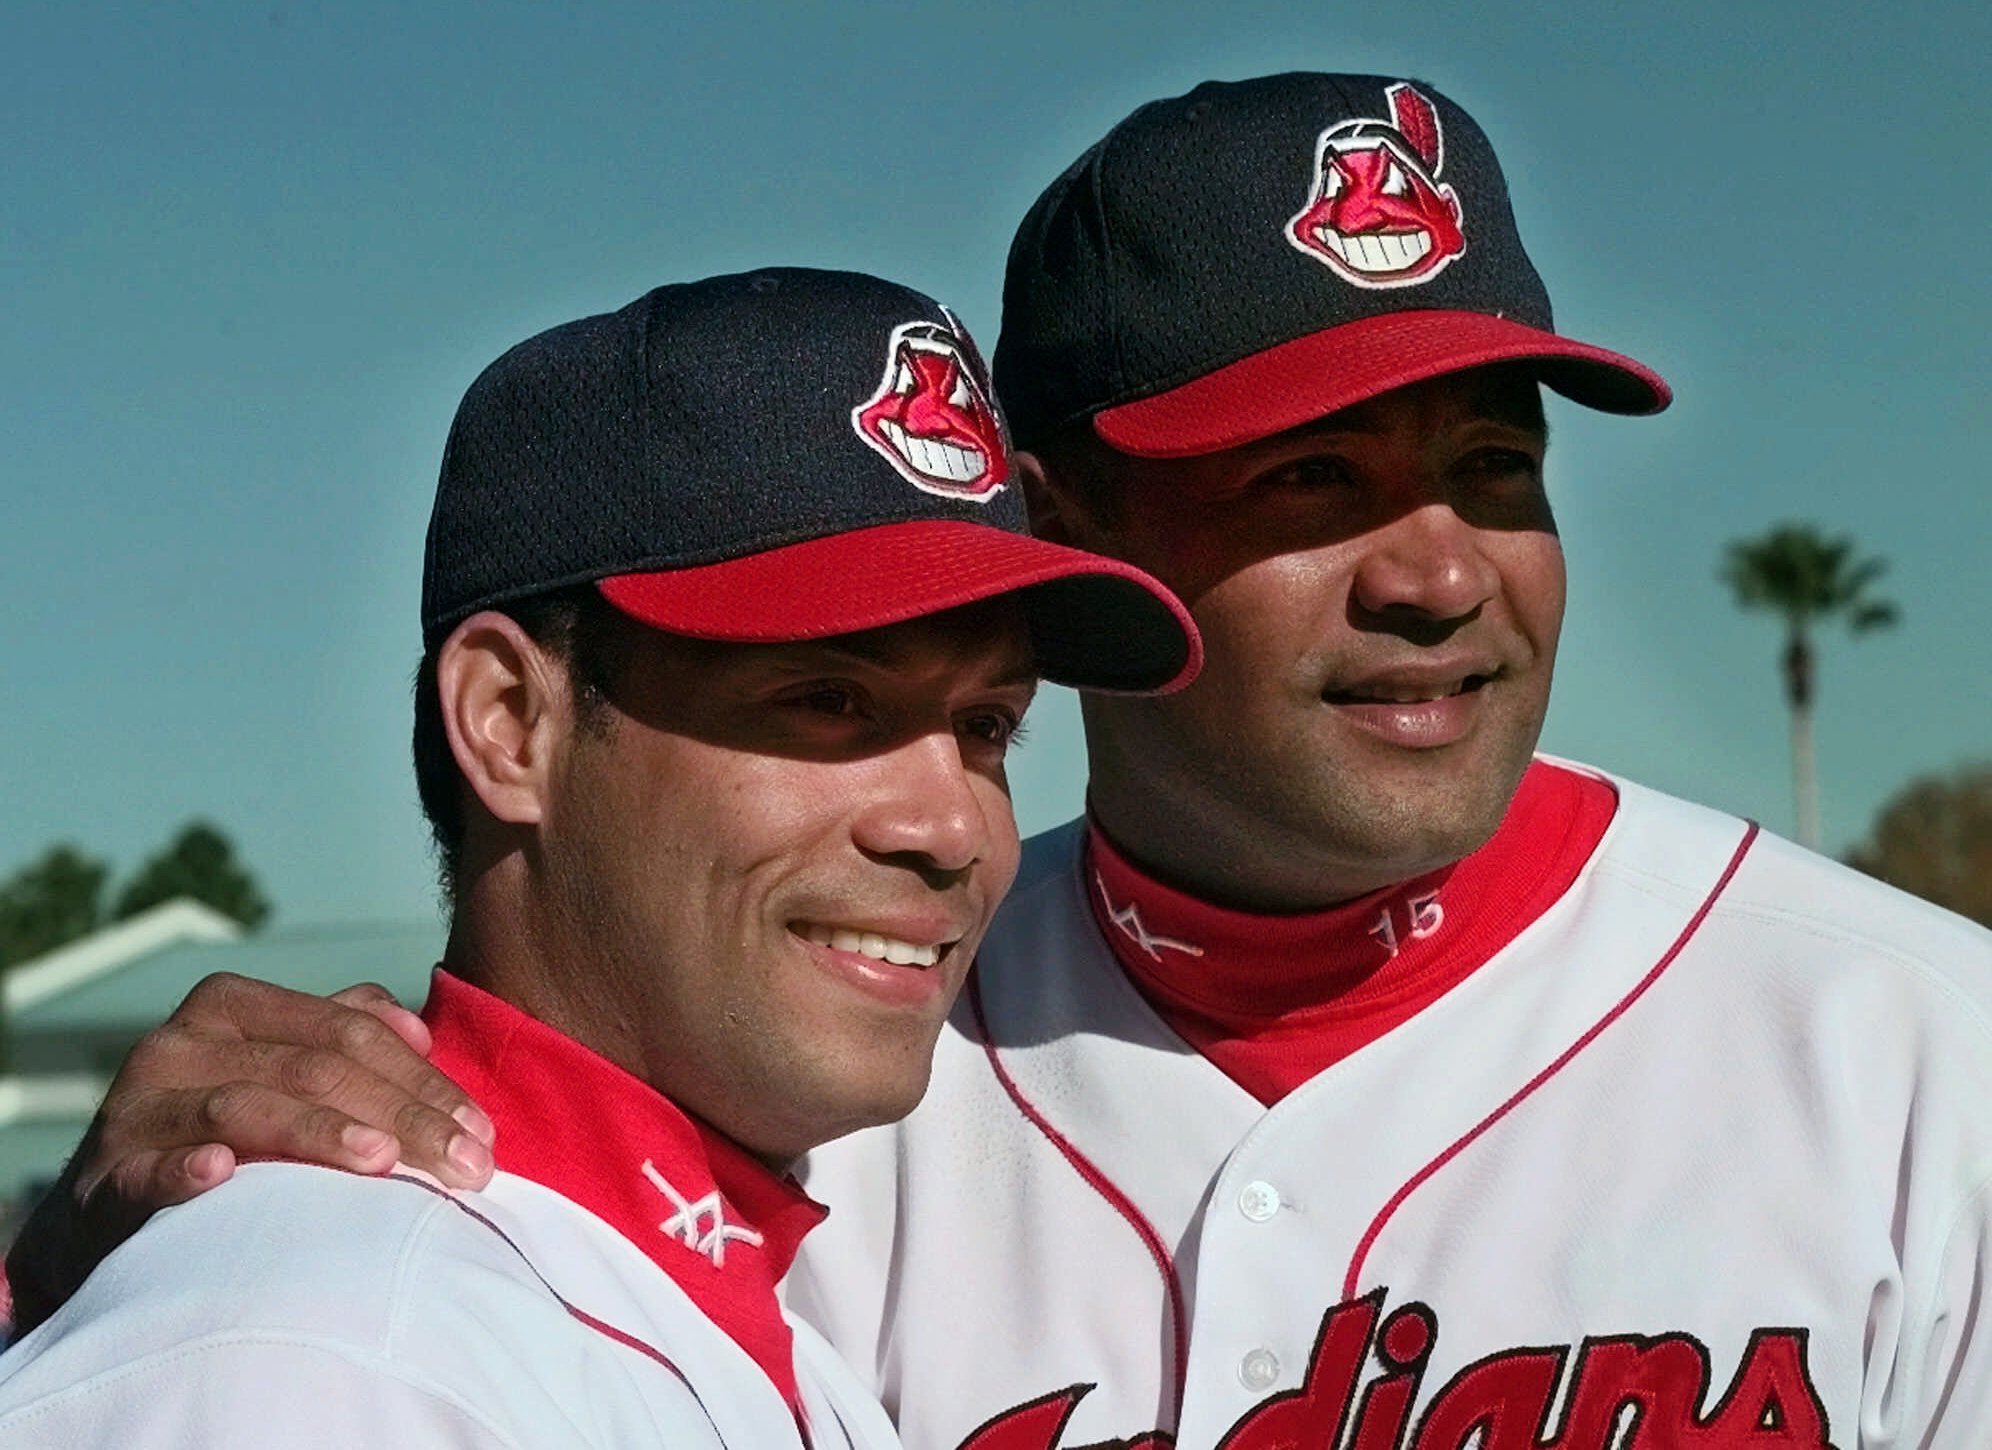 MLB's 10 best father/son teams based on WAR